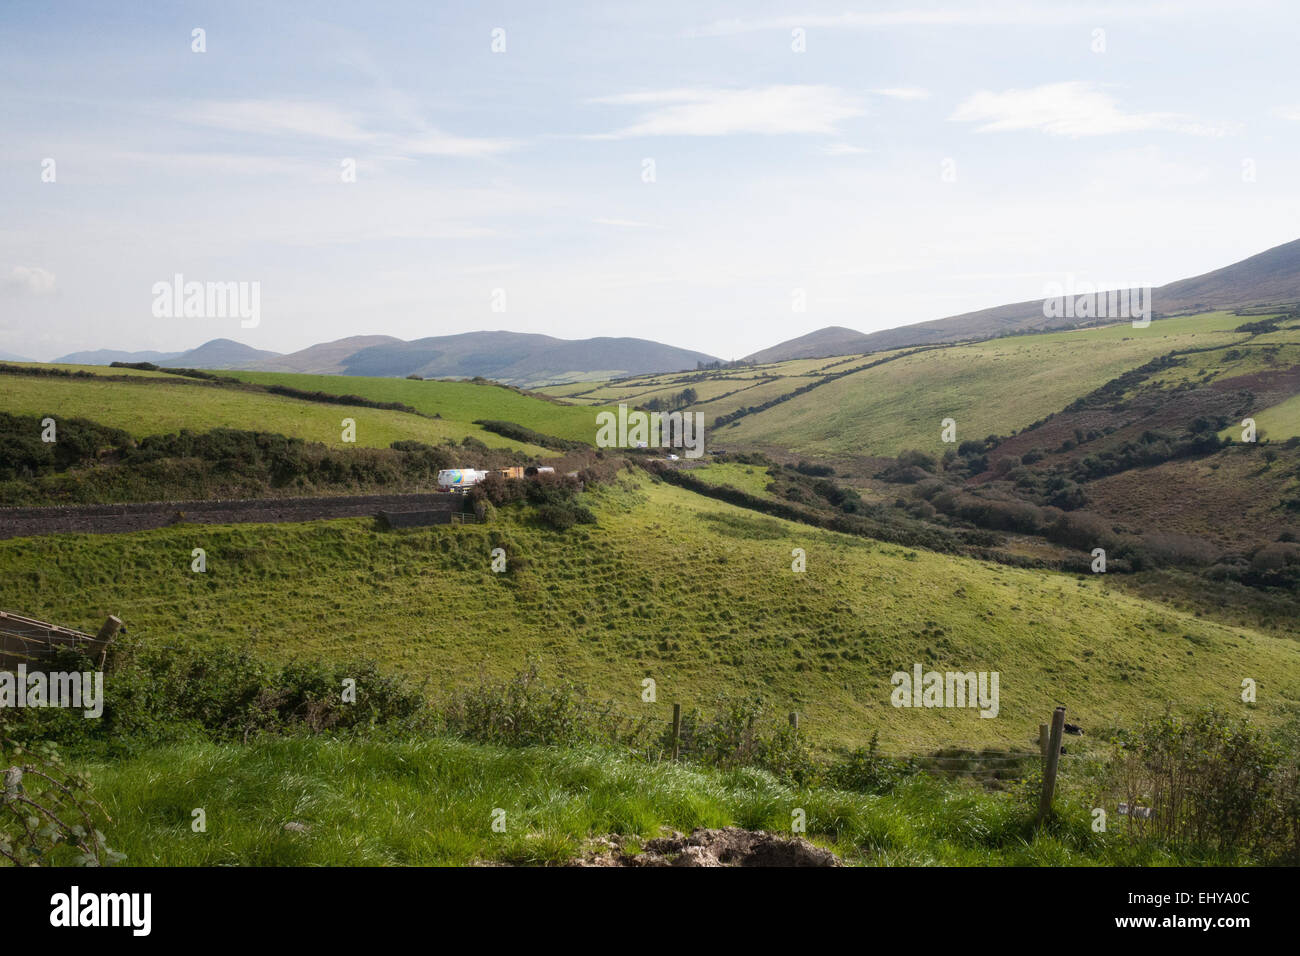 A scenic valley and green hills, the outdoor rural landscape of Ireland. Stock Photo